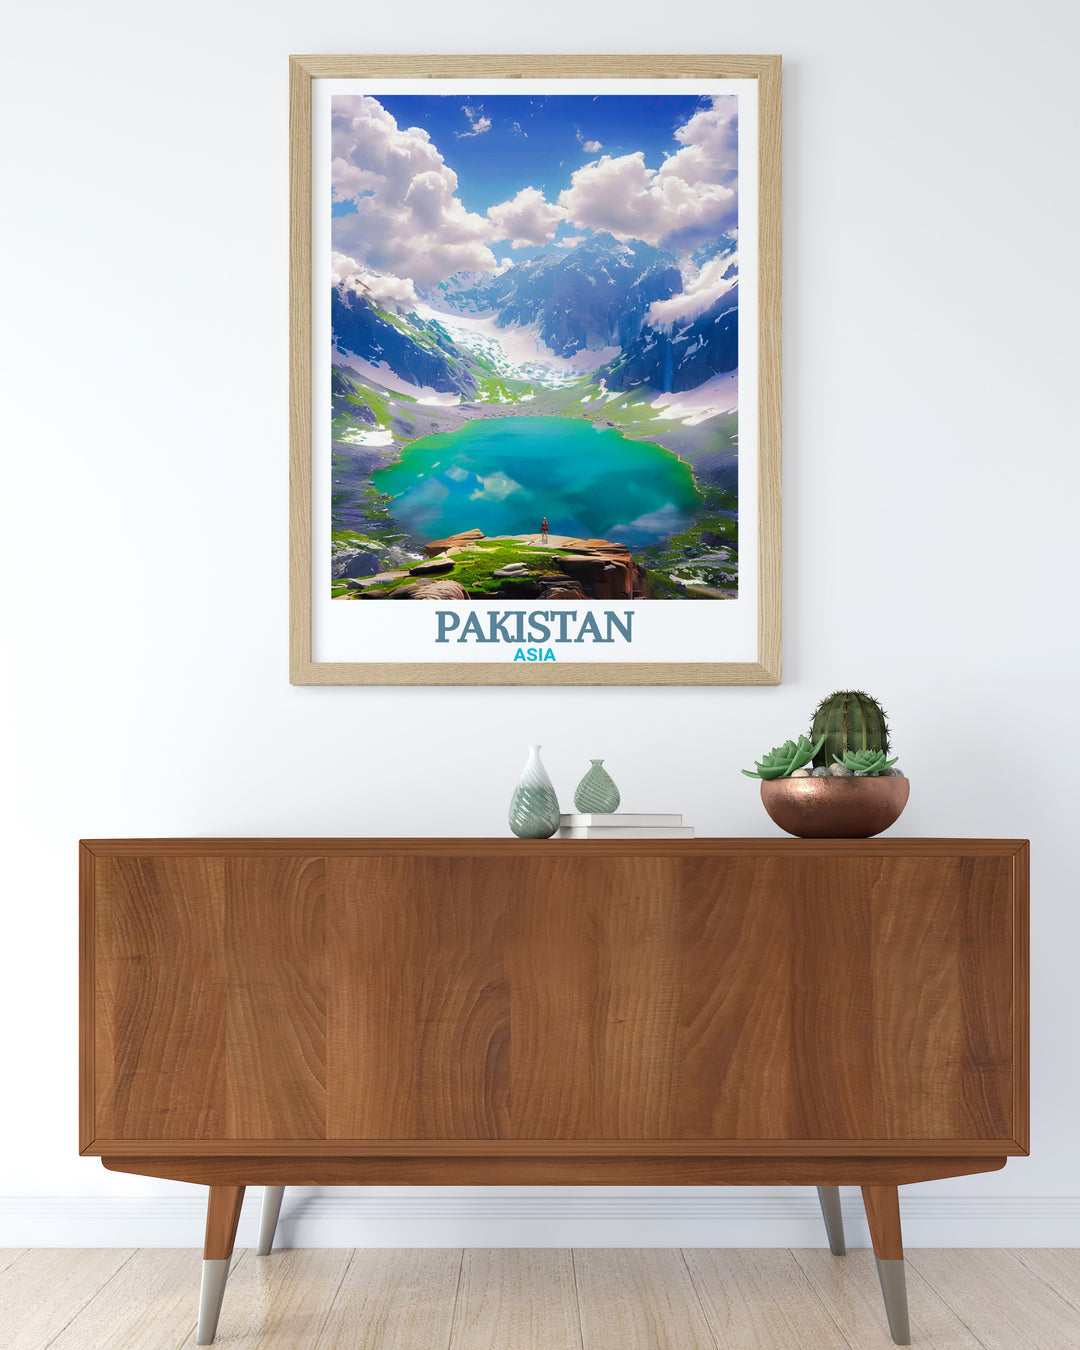 Stunning Lahore Art Print highlighting the intricate details of Lahore City Map along with the peaceful landscapes of Saif ul Muluk Lake making it a perfect addition to your wall art collection